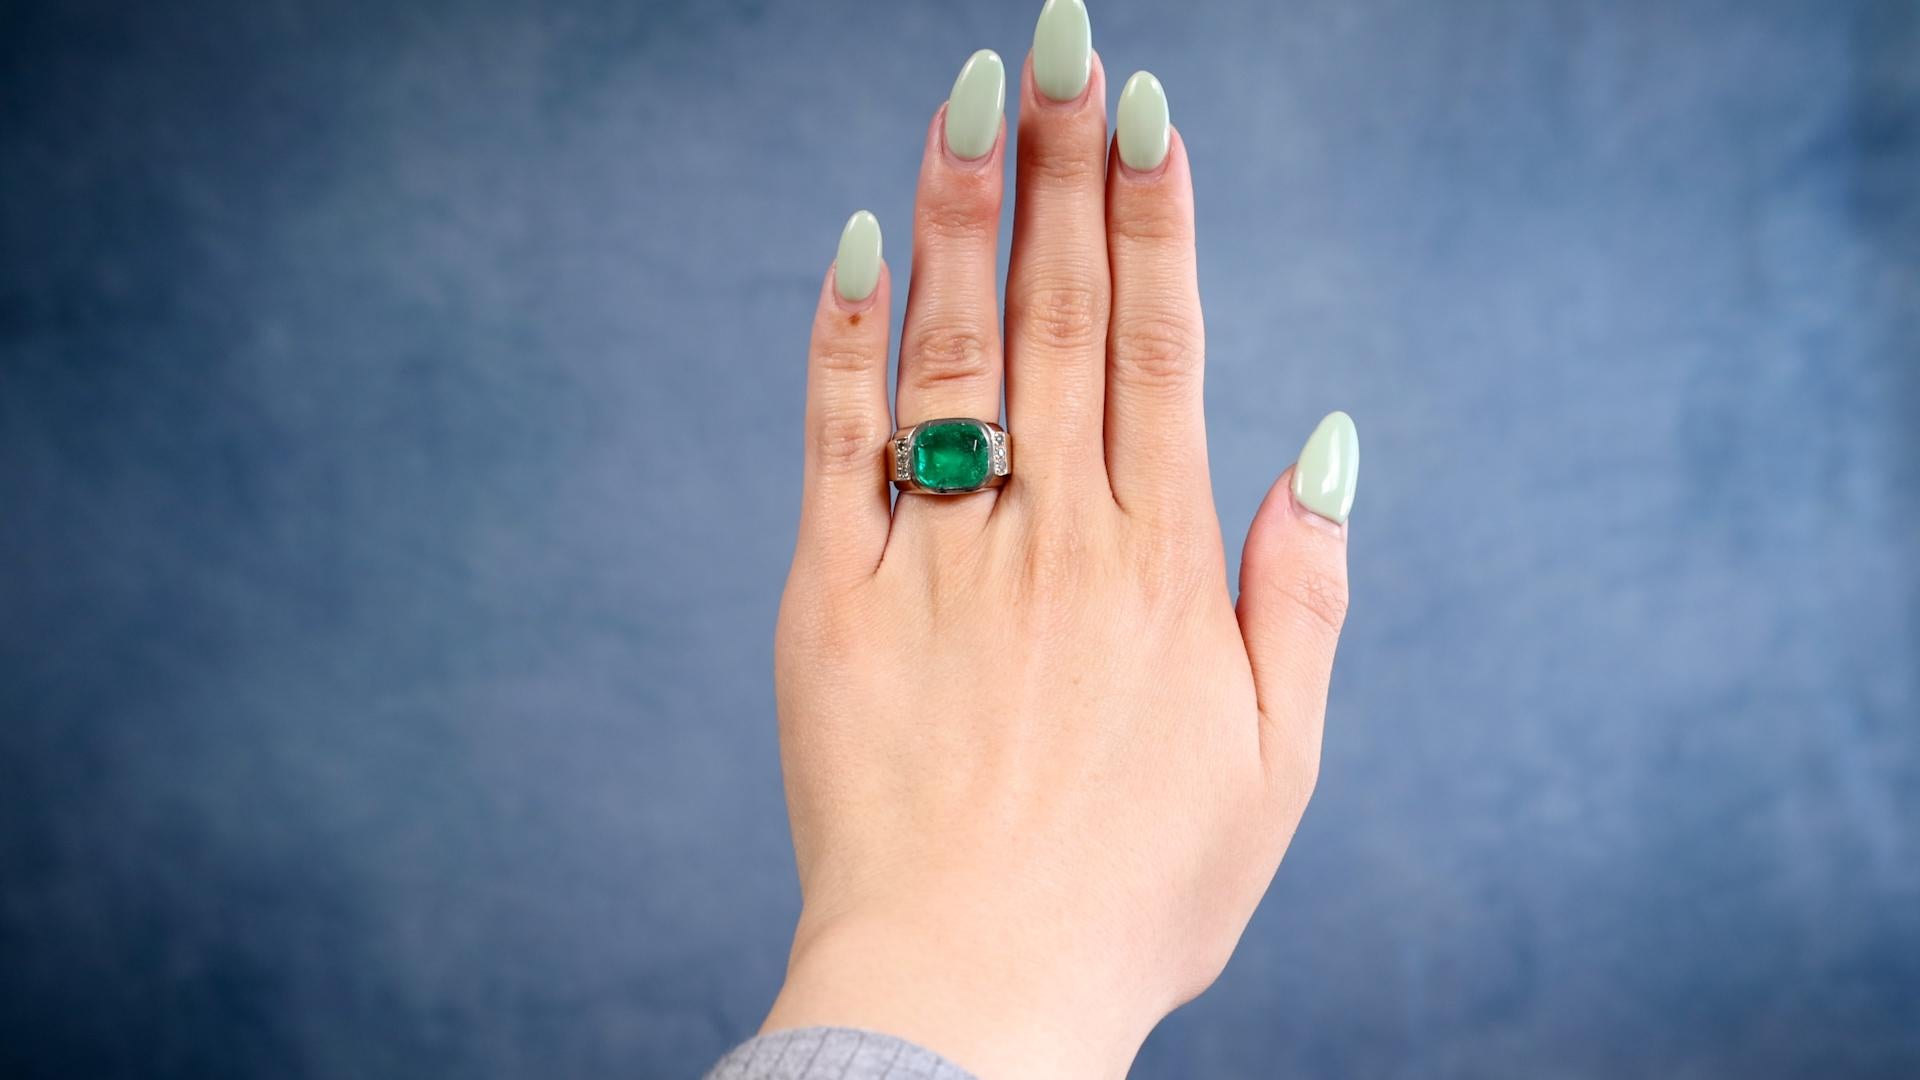 One Retro French GIA Colombian Emerald 18k Yellow Gold Ring. Featuring one GIA cushion cut emerald weighing approximately 4.00 carats, accompanied by GIA #6237221154 stating the emerald is of Colombian origin. Accented by six single cut diamonds